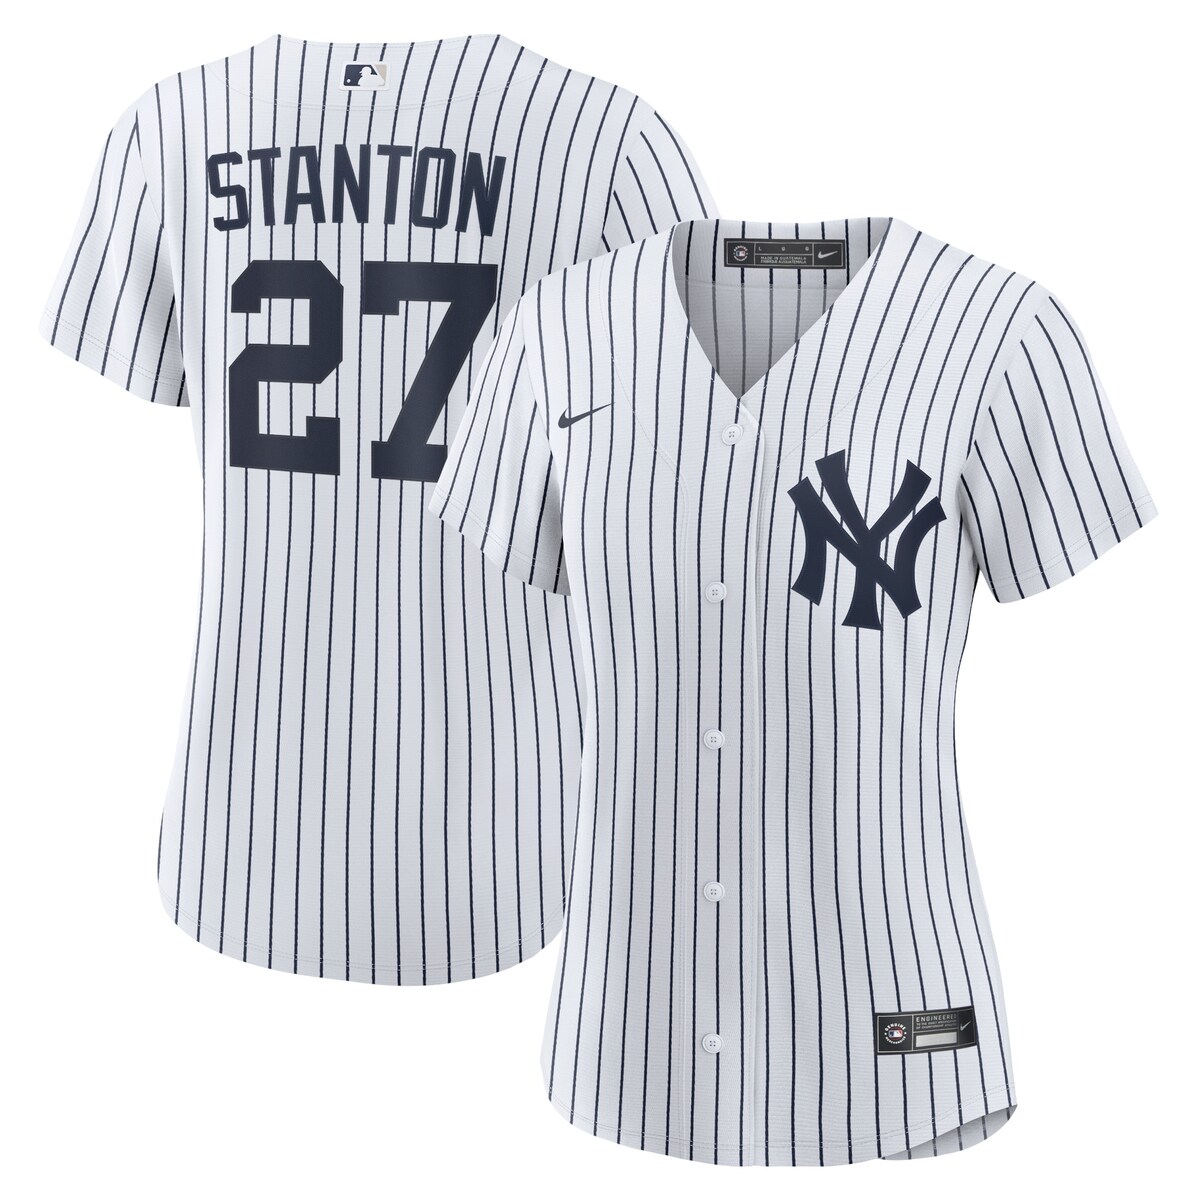 MLB L[X WJEX^g vJ jtH[ Nike iCL fB[X zCg (Women's MLB Nike Official Replica Player Jersey)